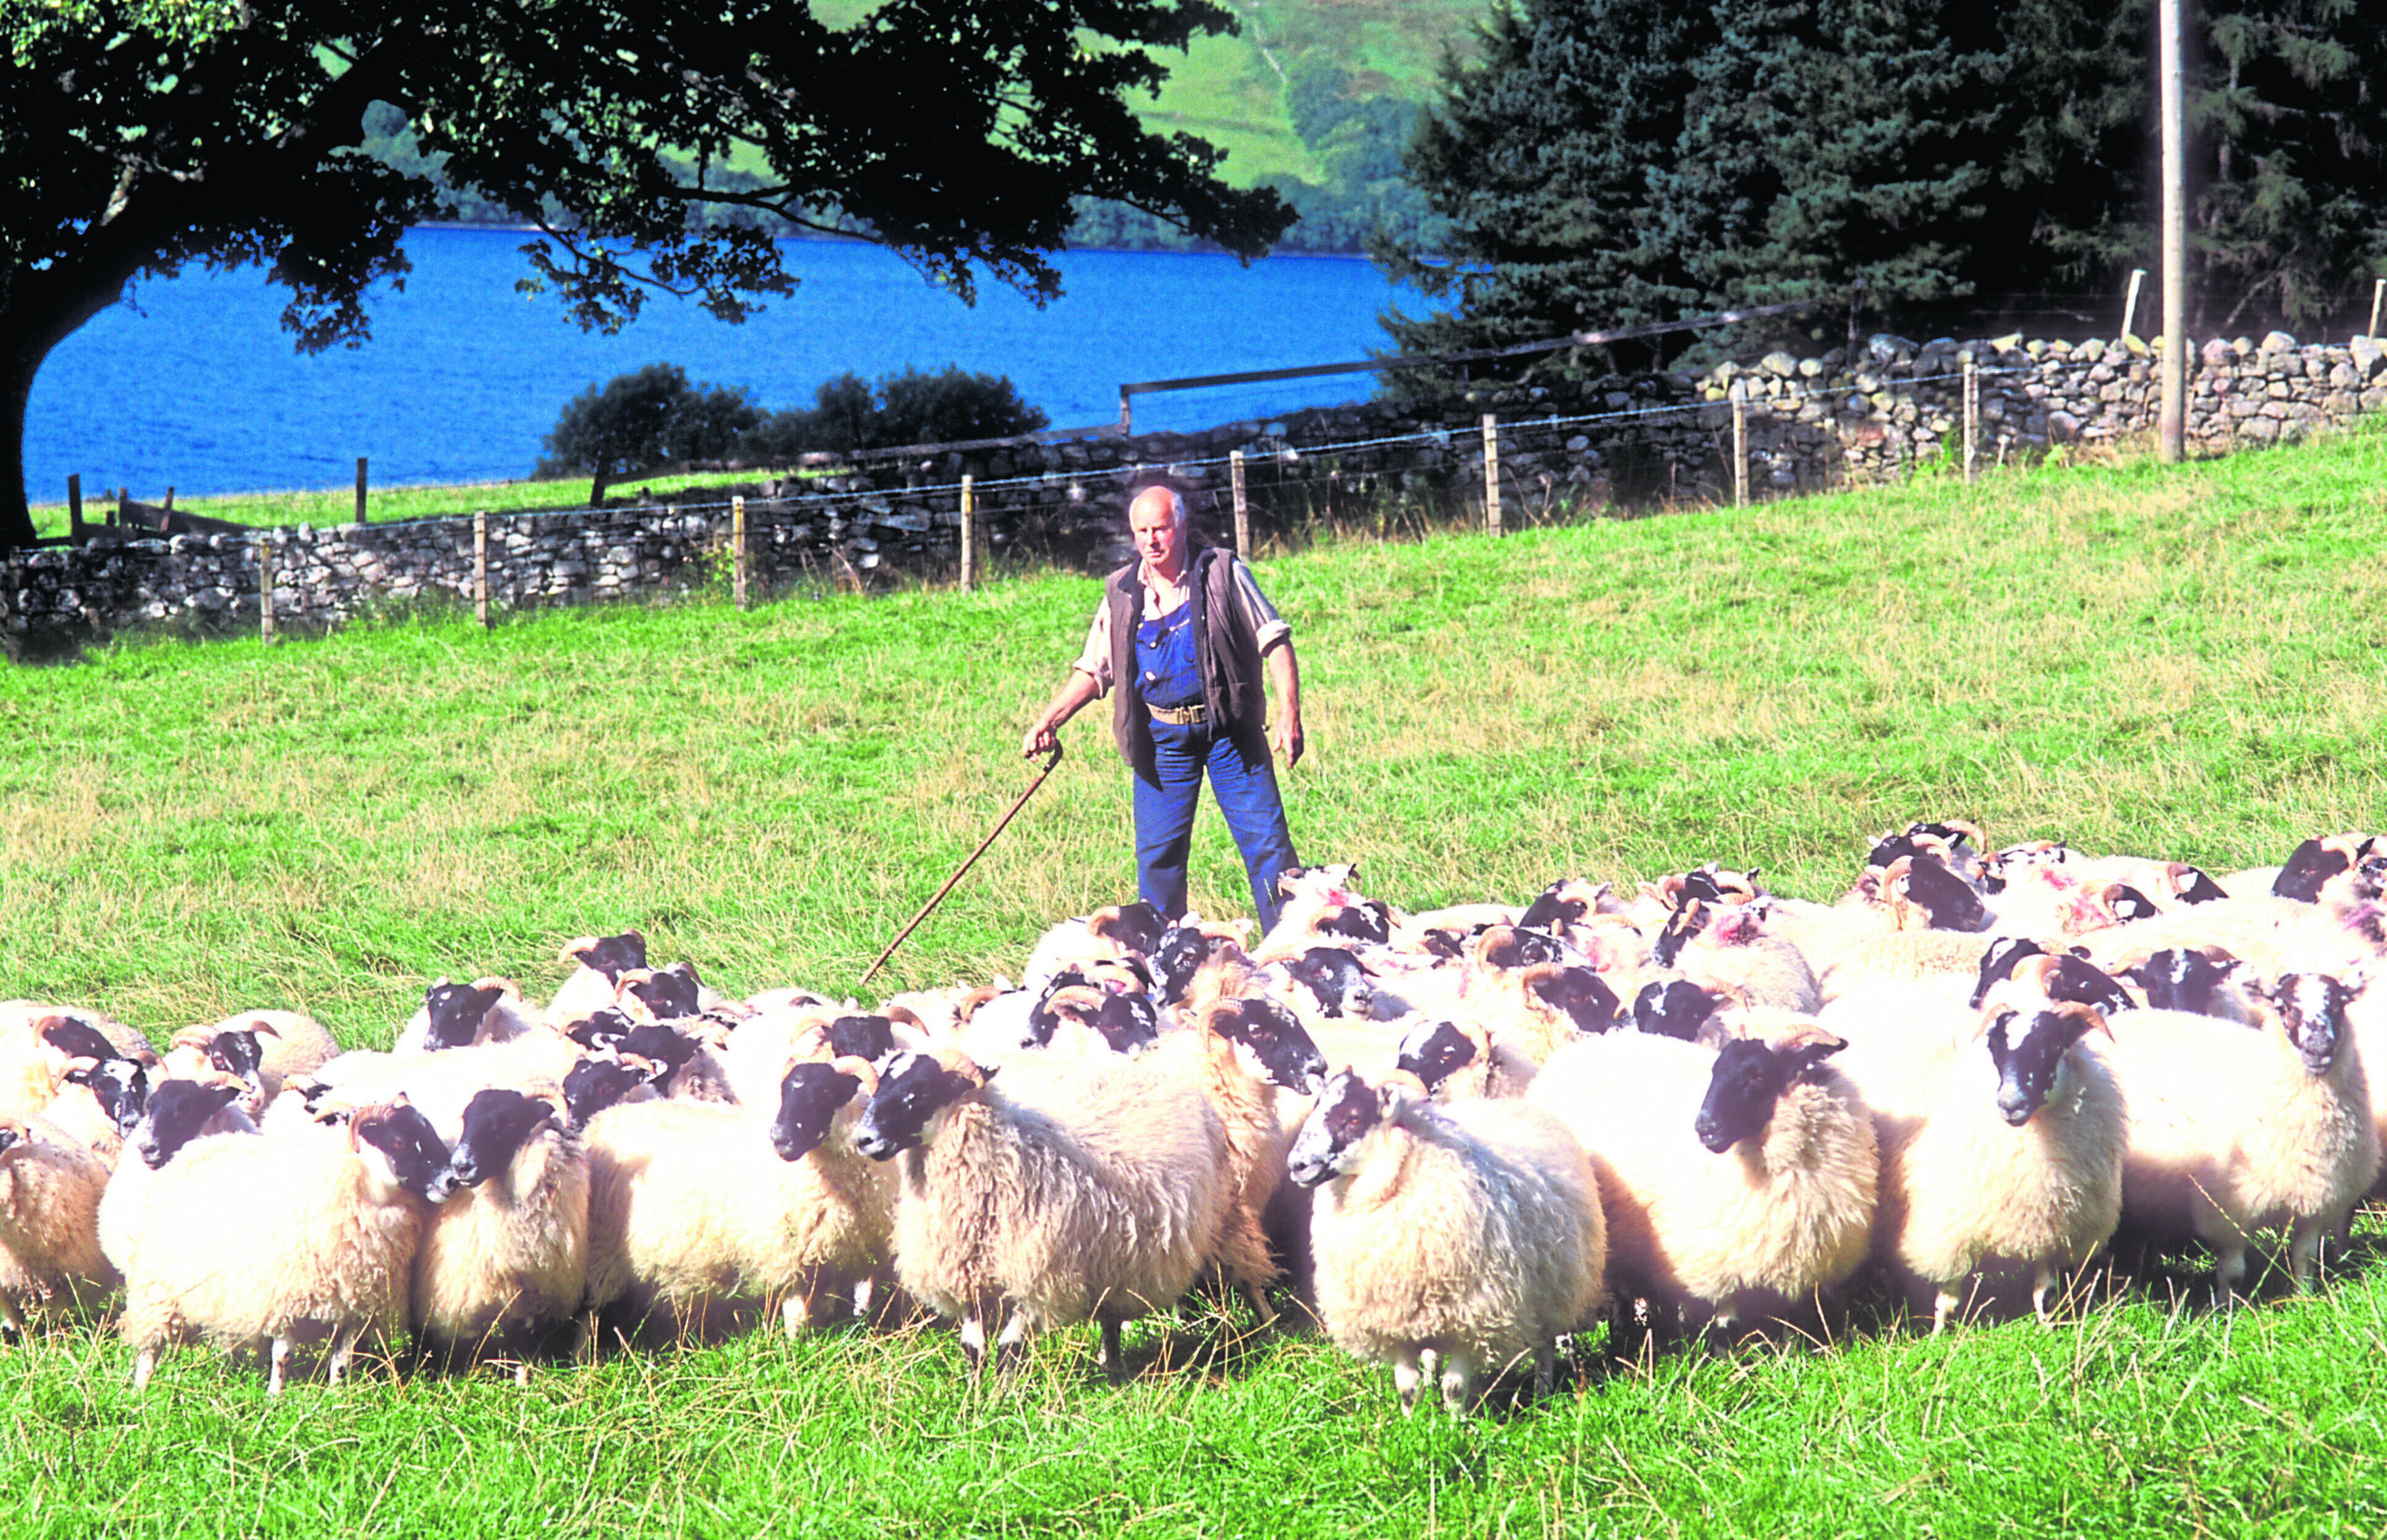 Mervyn at work with some of his flock of blackface sheep at his farm on the banks of Loch Tay